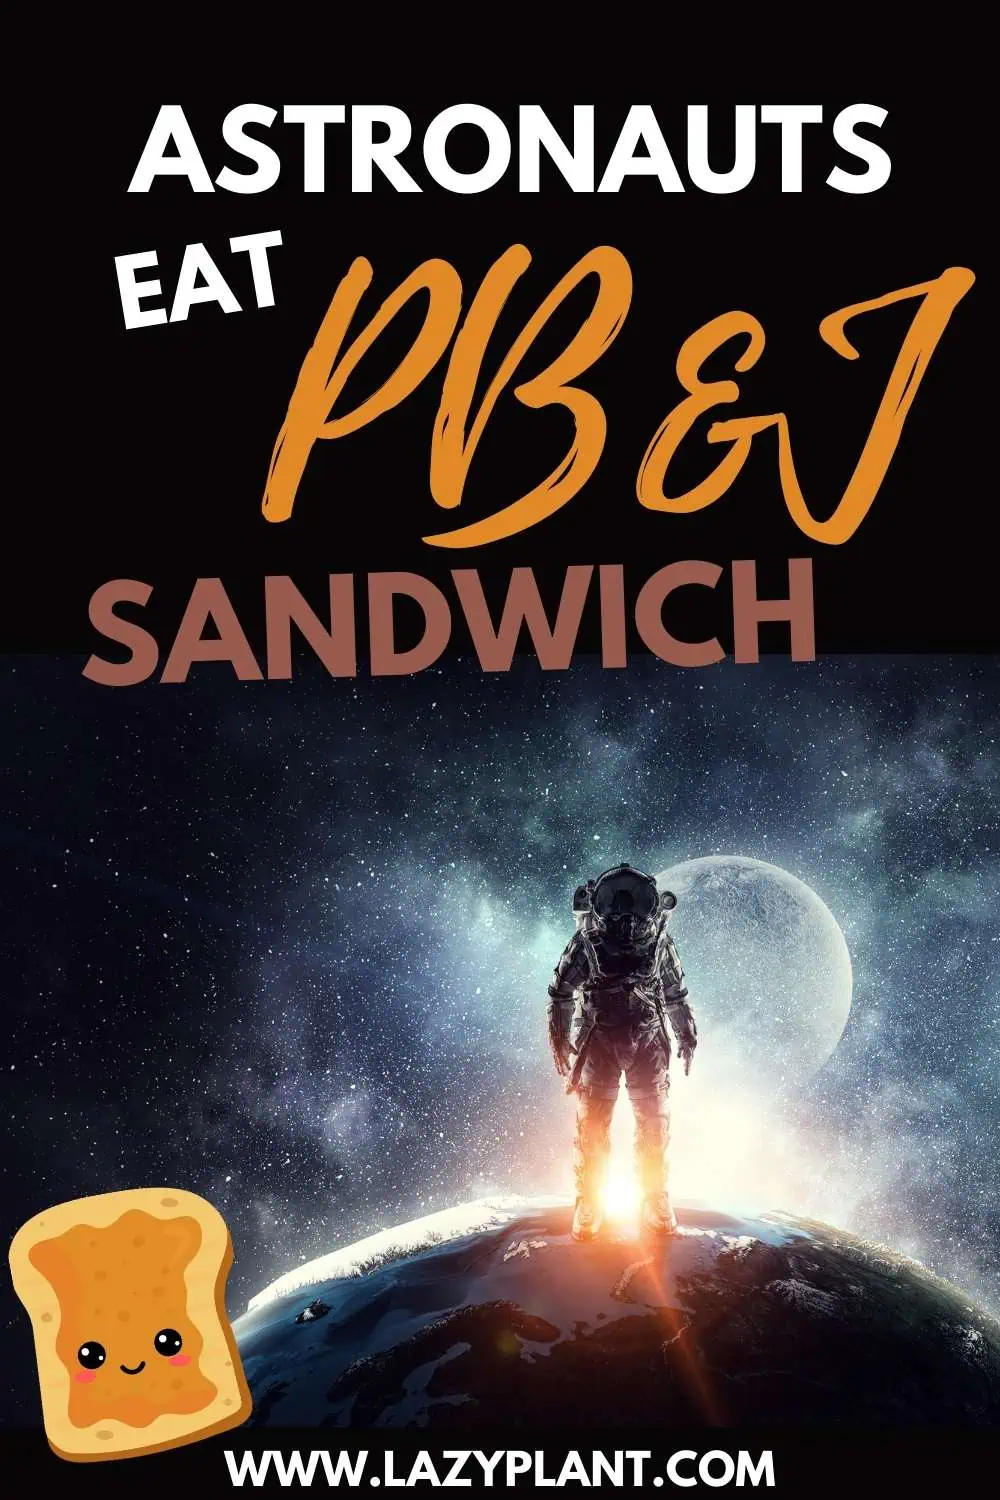 Astronauts eat PB&J sandwiches. It’s a Superfood for Weight Loss.